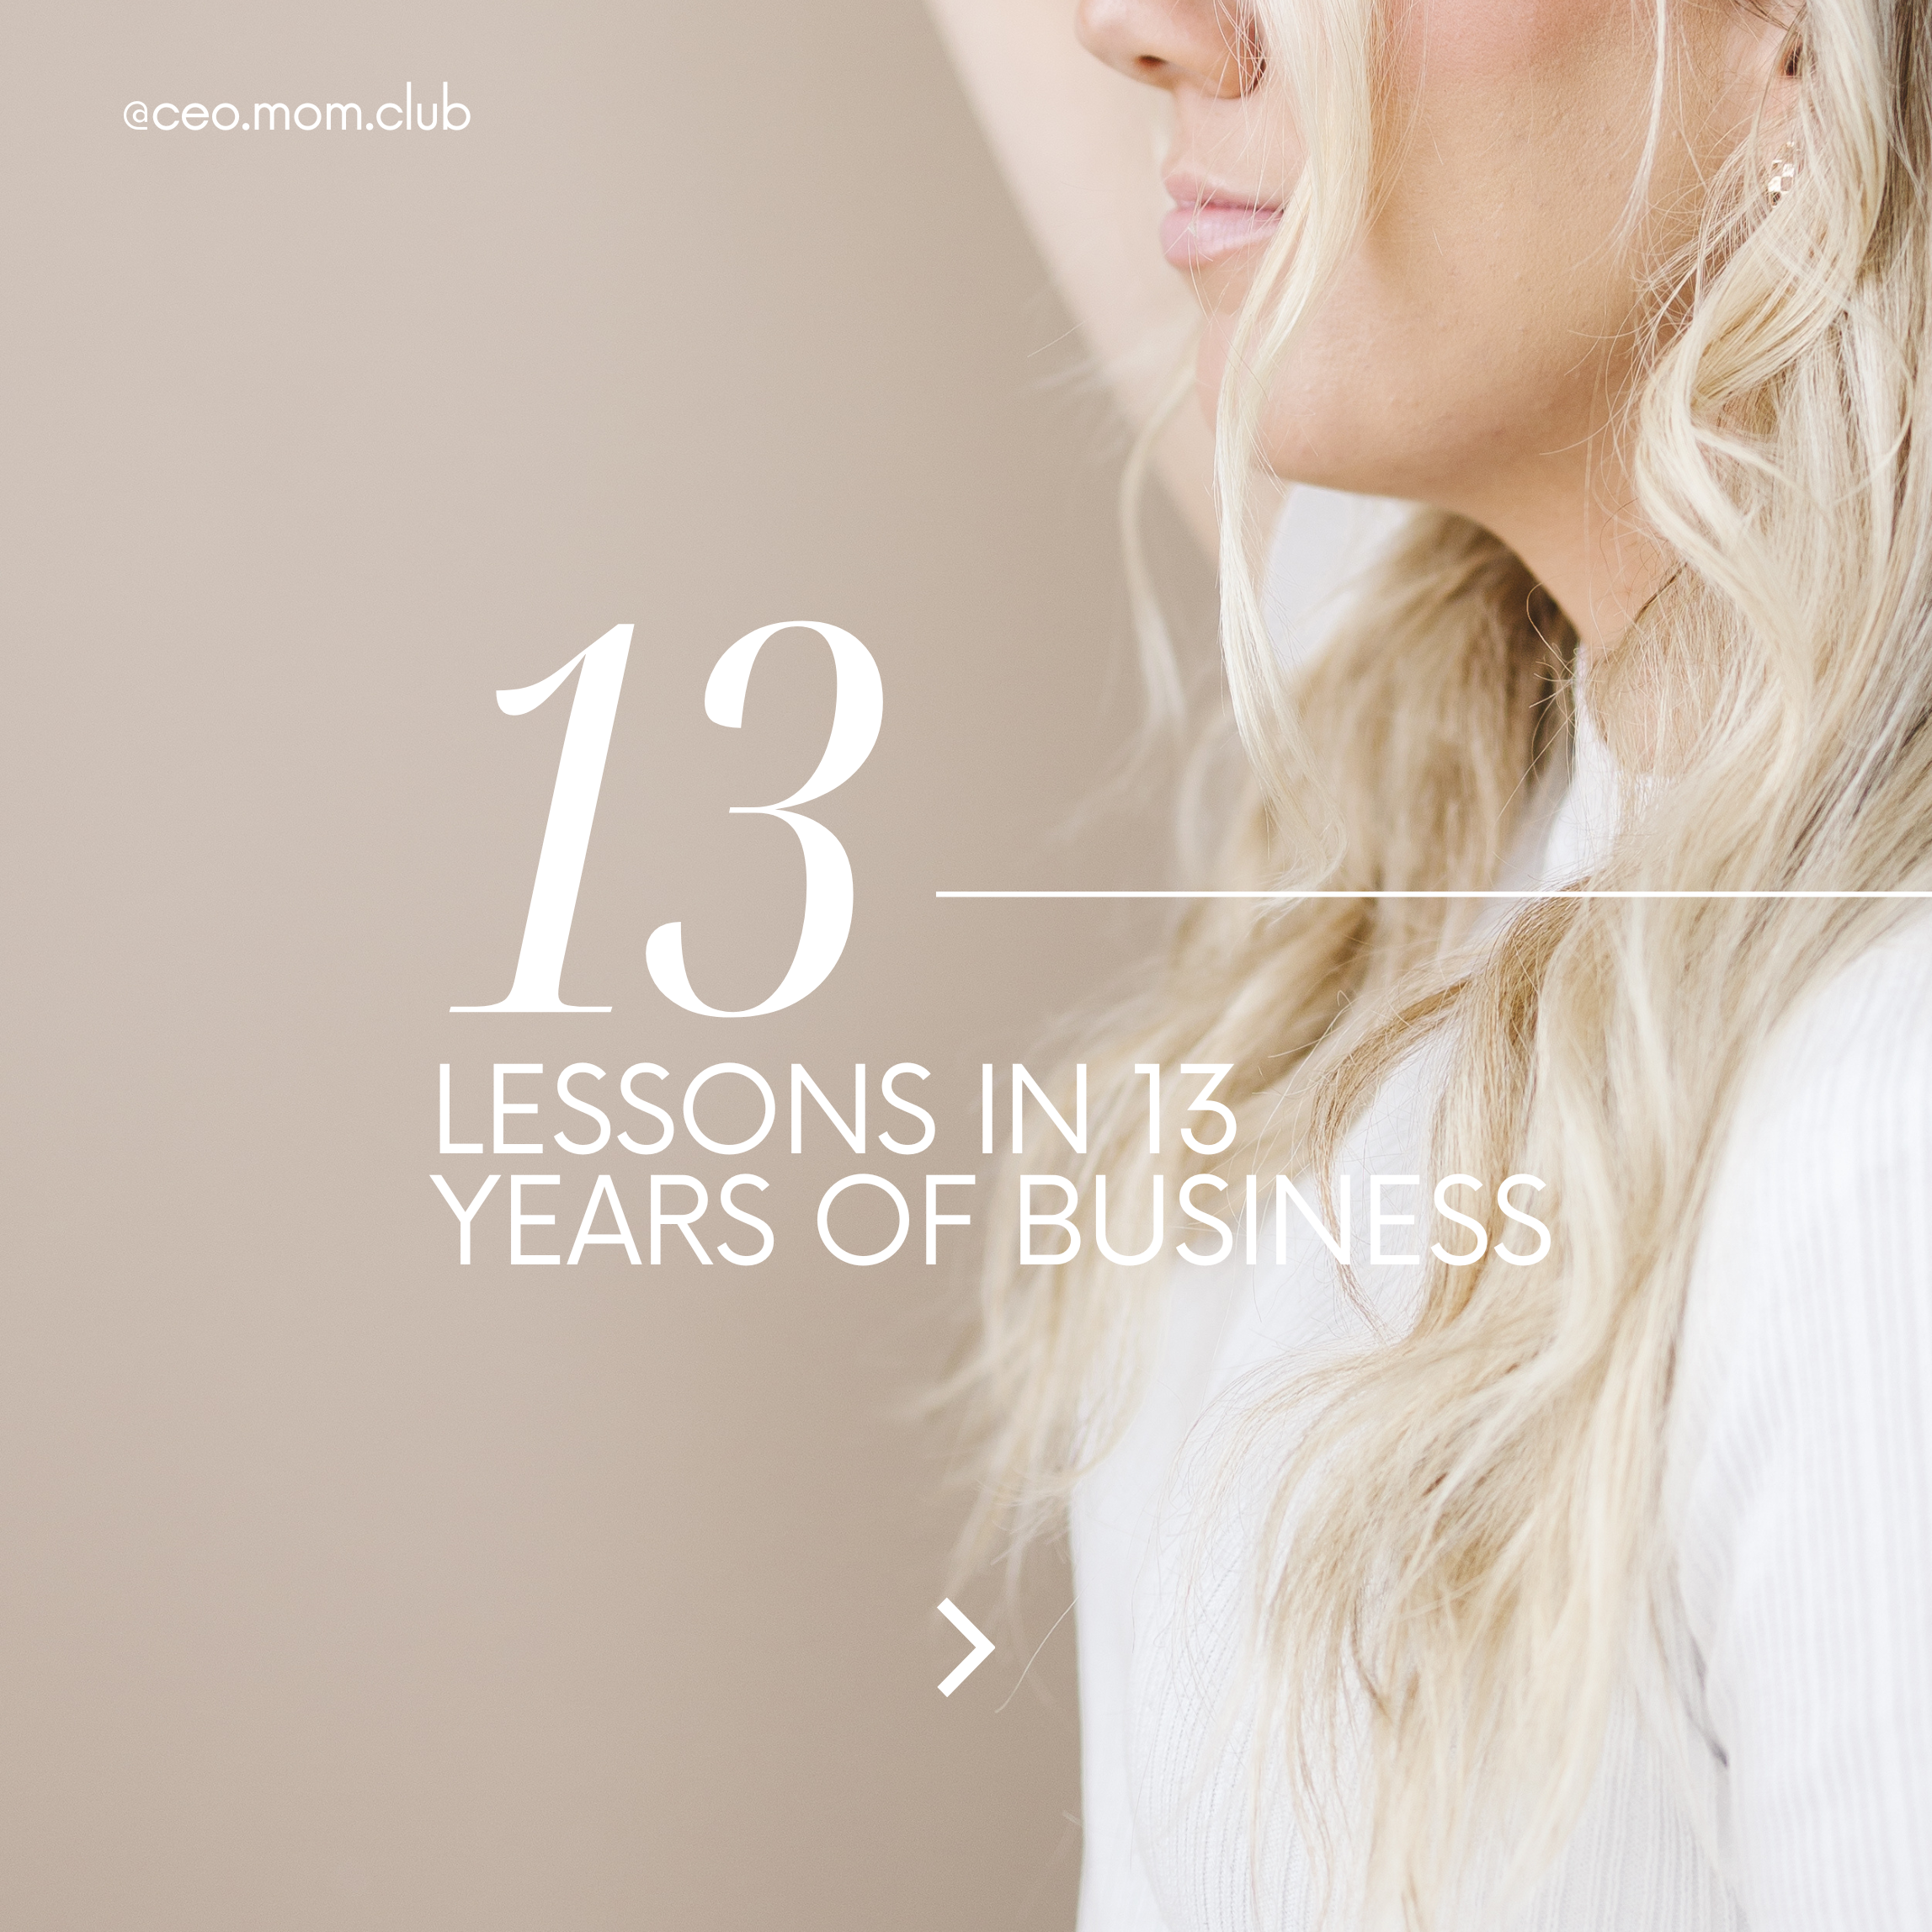 13 Lessons in 13 Years of Business